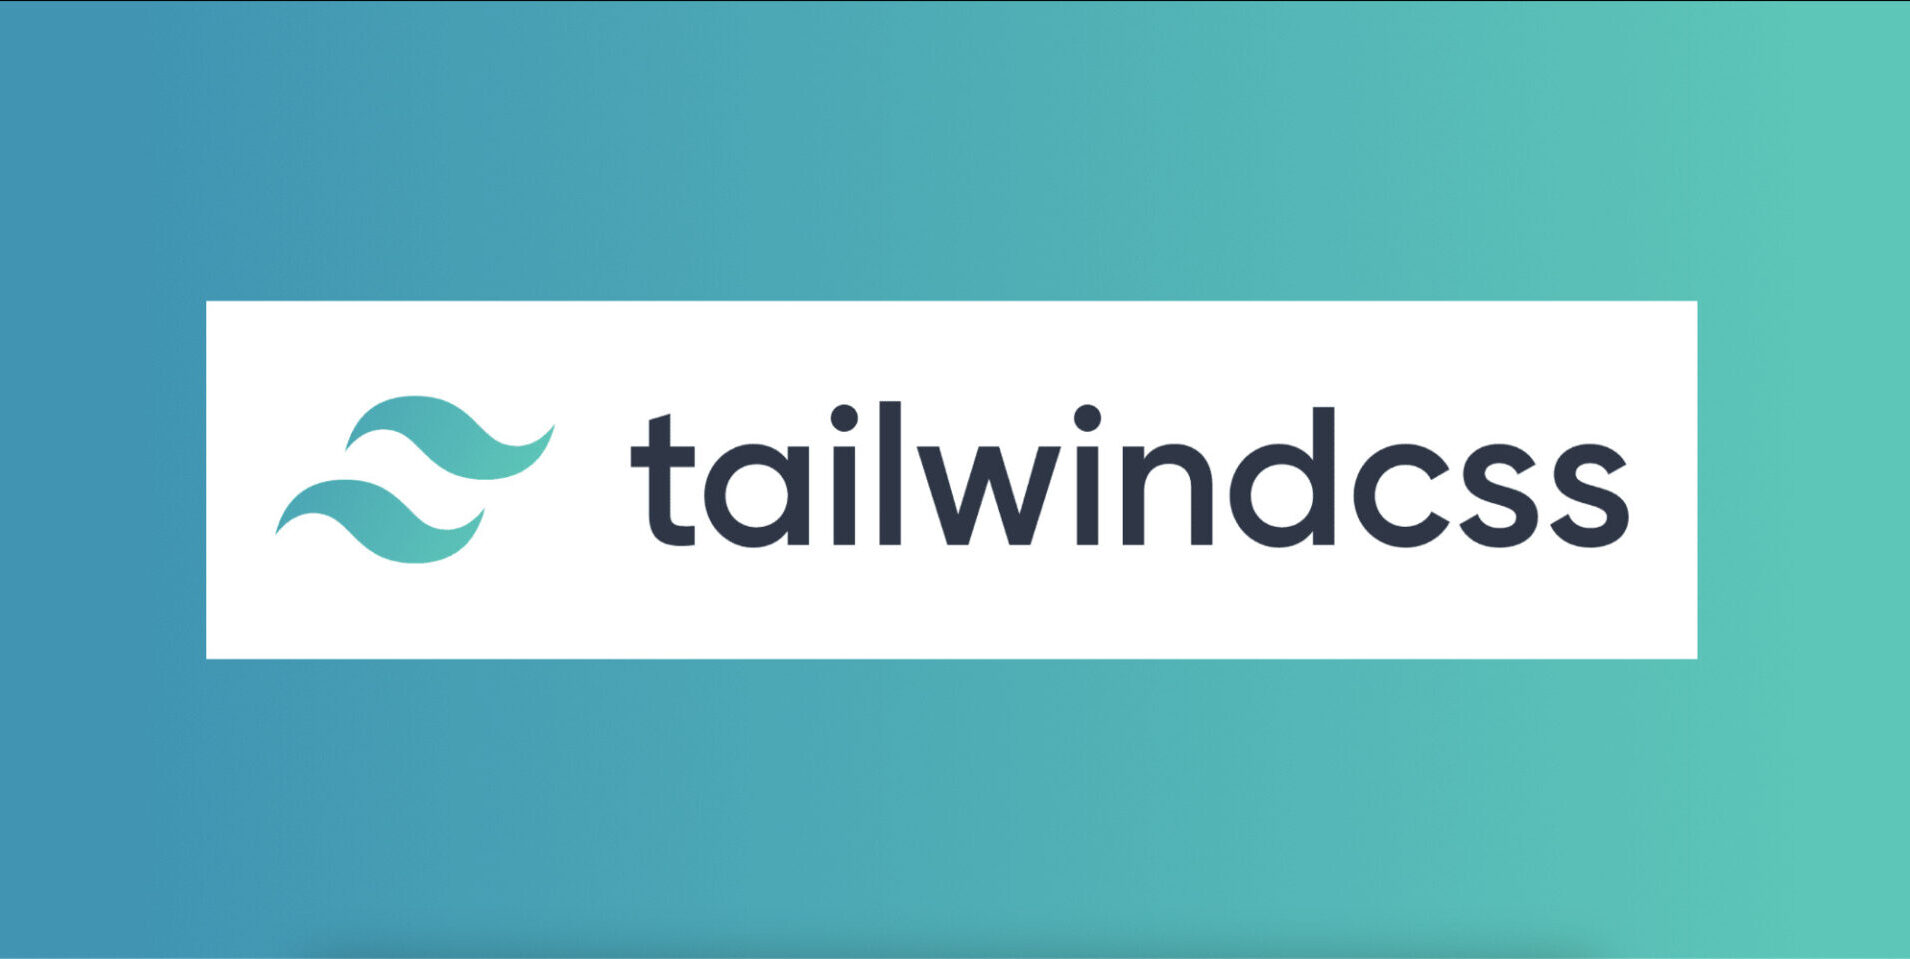 blow-away-your-styles-with-Tailwind-CSS